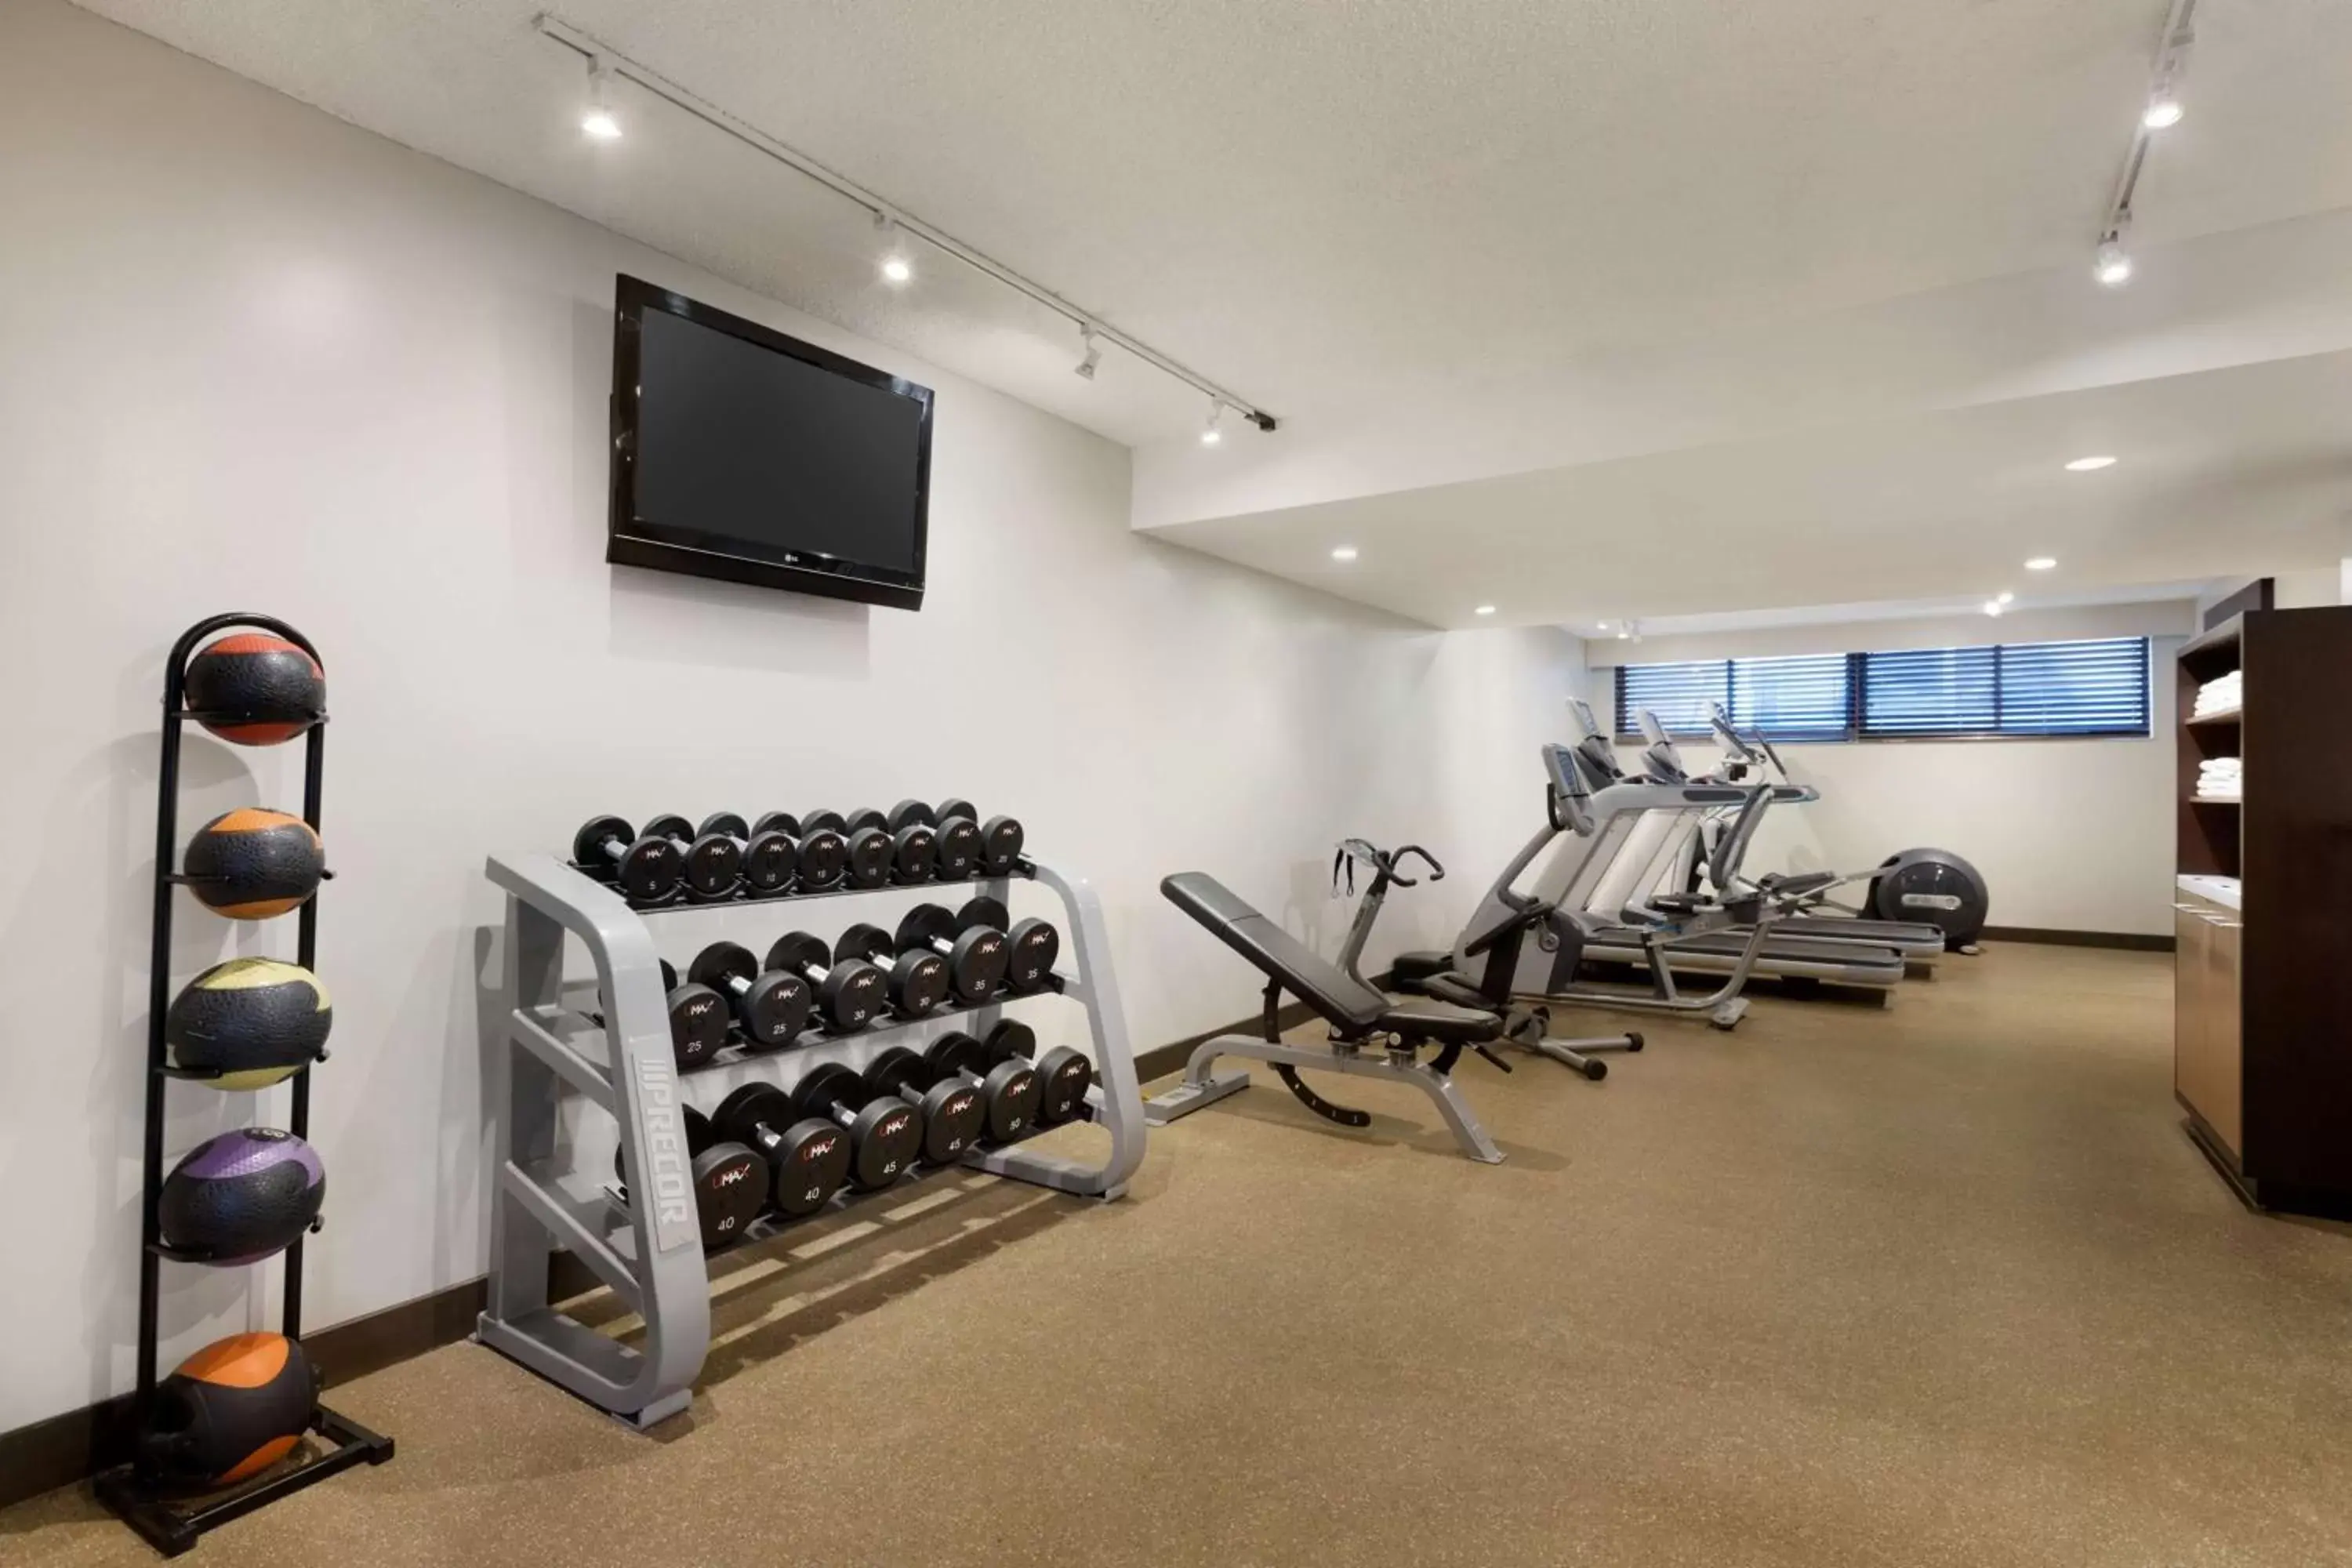 Fitness centre/facilities, Fitness Center/Facilities in Embassy Suites by Hilton Piscataway Somerset